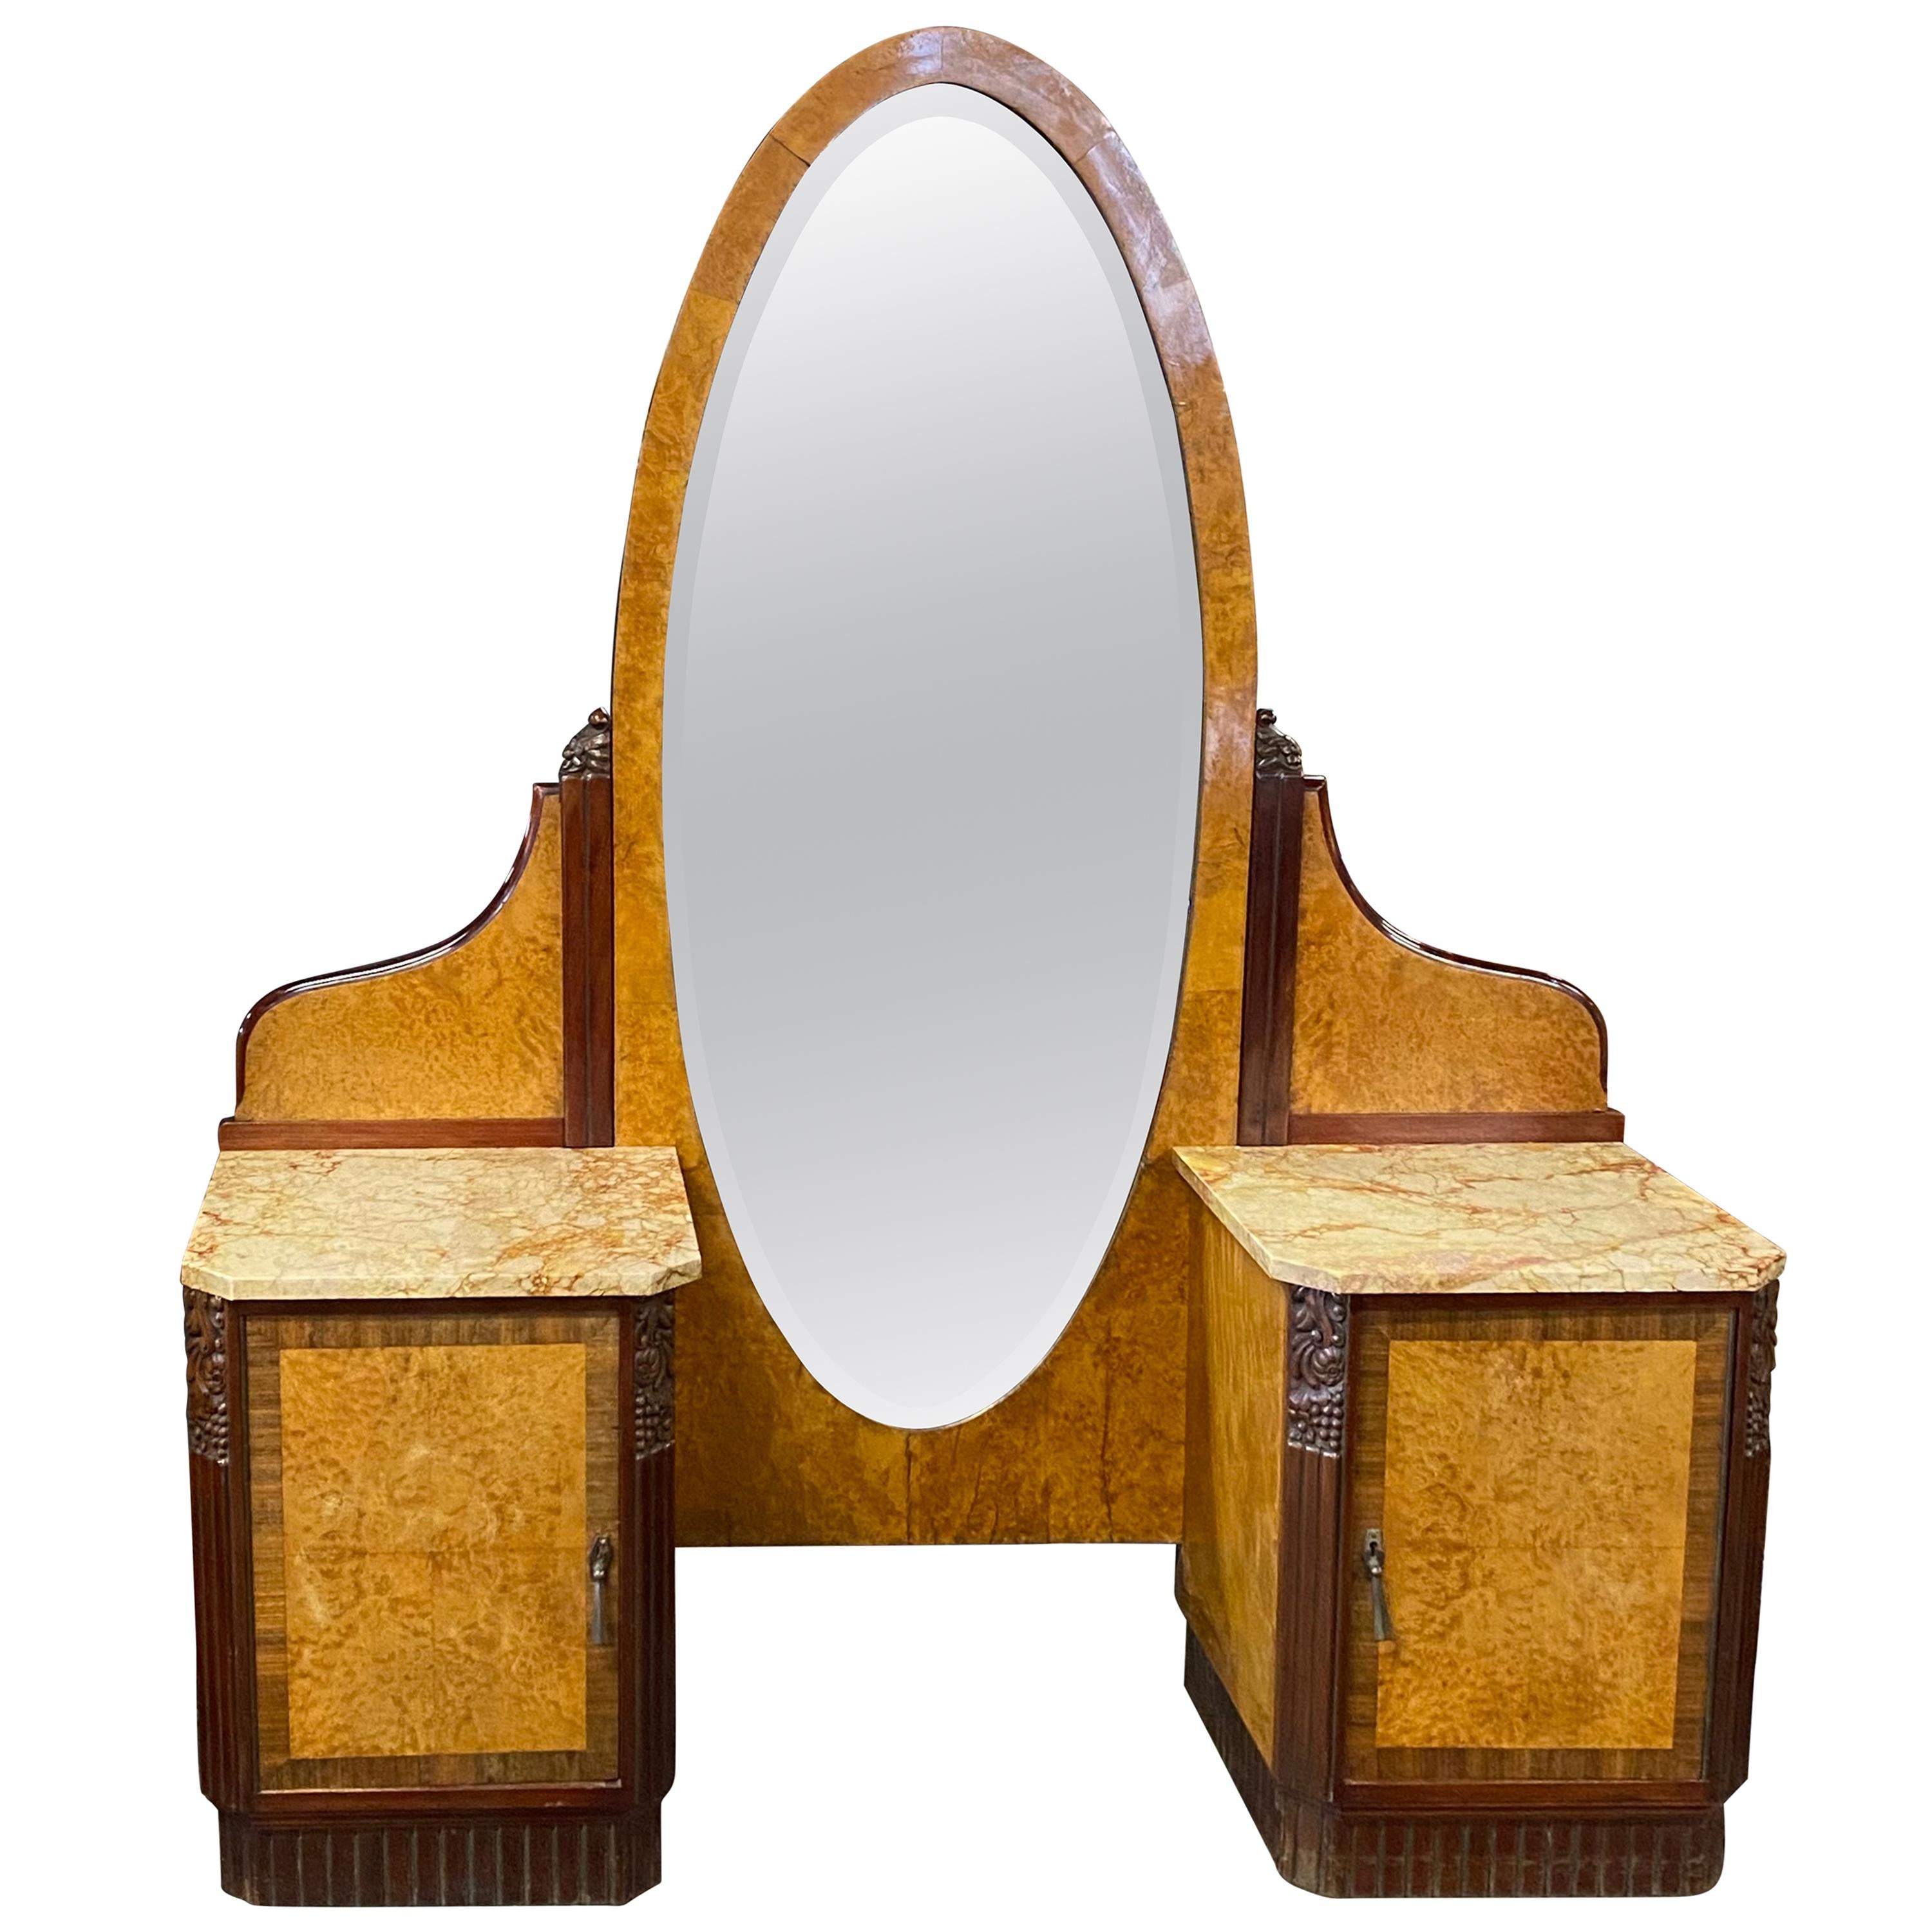 Stunning French Art Deco Vanity/ Dressing Table/ Full View Oval Mirror